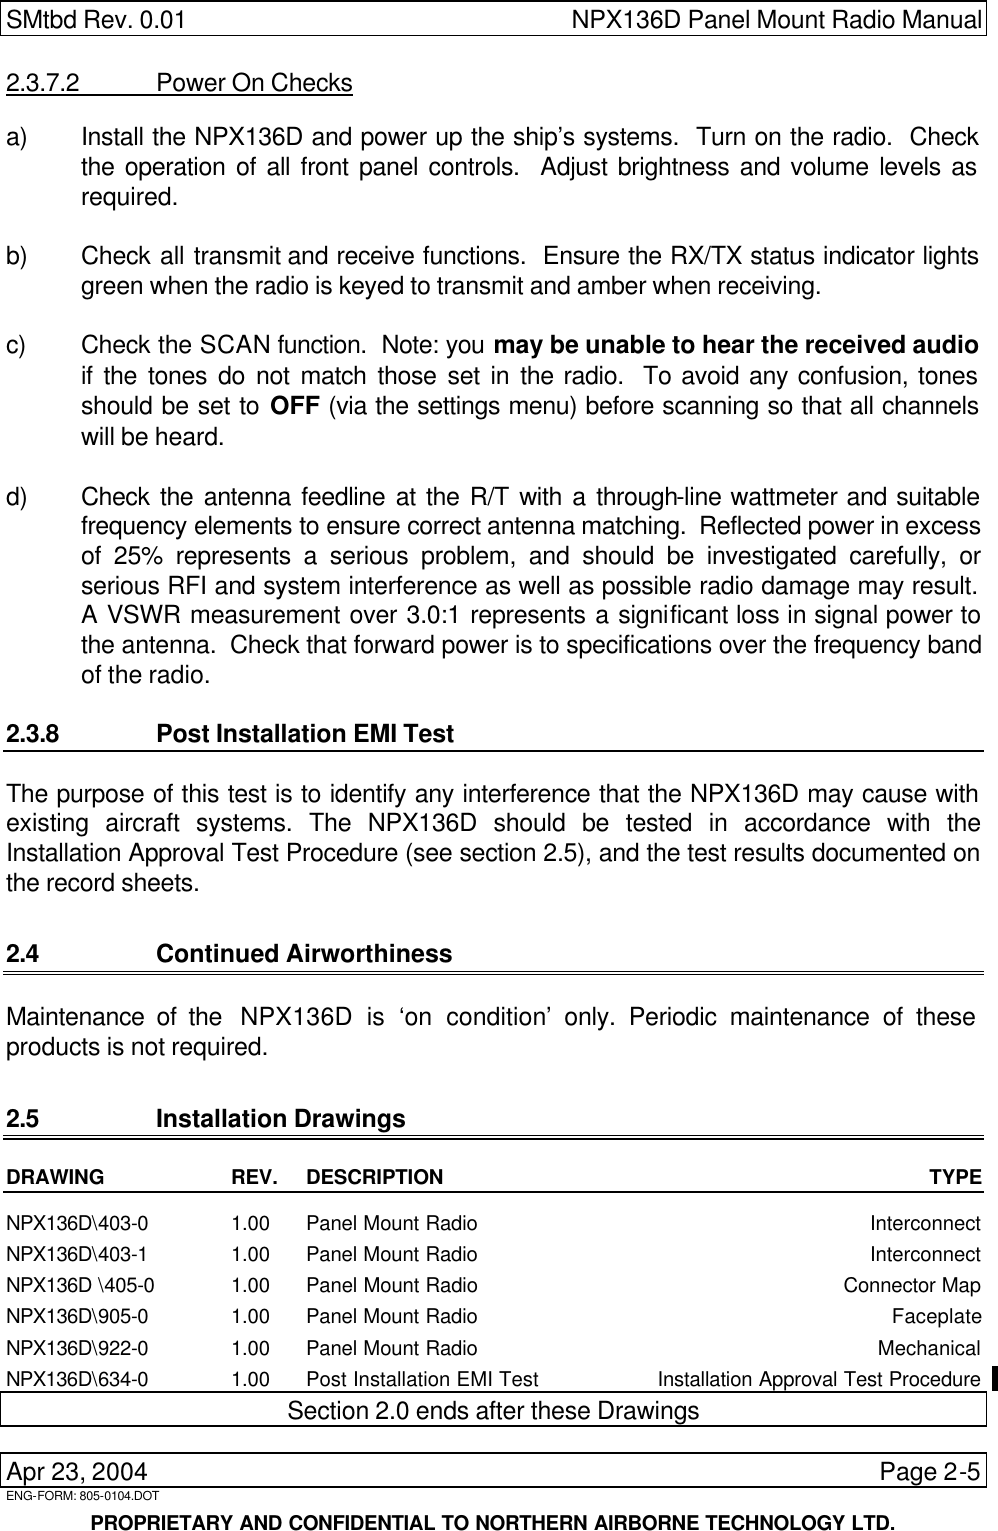 SMtbd Rev. 0.01 NPX136D Panel Mount Radio Manual  Apr 23, 2004 Page 2-5 ENG-FORM: 805-0104.DOT      PROPRIETARY AND CONFIDENTIAL TO NORTHERN AIRBORNE TECHNOLOGY LTD. 2.3.7.2 Power On Checks a) Install the NPX136D and power up the ship’s systems.  Turn on the radio.  Check the operation of all front panel controls.  Adjust brightness and volume levels as required.  b) Check all transmit and receive functions.  Ensure the RX/TX status indicator lights green when the radio is keyed to transmit and amber when receiving.  c) Check the SCAN function.  Note: you may be unable to hear the received audio if the tones do not match those set in the radio.  To avoid any confusion, tones should be set to OFF (via the settings menu) before scanning so that all channels will be heard.  d) Check the antenna feedline at the R/T with a through-line wattmeter and suitable frequency elements to ensure correct antenna matching.  Reflected power in excess of 25% represents a serious problem, and should be investigated carefully, or serious RFI and system interference as well as possible radio damage may result.  A VSWR measurement over 3.0:1 represents a significant loss in signal power to the antenna.  Check that forward power is to specifications over the frequency band of the radio.  2.3.8 Post Installation EMI Test The purpose of this test is to identify any interference that the NPX136D may cause with existing aircraft systems. The NPX136D should be tested in accordance with the Installation Approval Test Procedure (see section 2.5), and the test results documented on the record sheets.  2.4 Continued Airworthiness Maintenance of the  NPX136D is ‘on condition’ only. Periodic maintenance of these products is not required. 2.5 Installation Drawings DRAWING REV. DESCRIPTION TYPE  NPX136D\403-0 1.00 Panel Mount Radio Interconnect NPX136D\403-1 1.00 Panel Mount Radio Interconnect NPX136D \405-0 1.00 Panel Mount Radio Connector Map NPX136D\905-0 1.00 Panel Mount Radio Faceplate NPX136D\922-0 1.00 Panel Mount Radio Mechanical NPX136D\634-0 1.00 Post Installation EMI Test Installation Approval Test Procedure Section 2.0 ends after these Drawings 